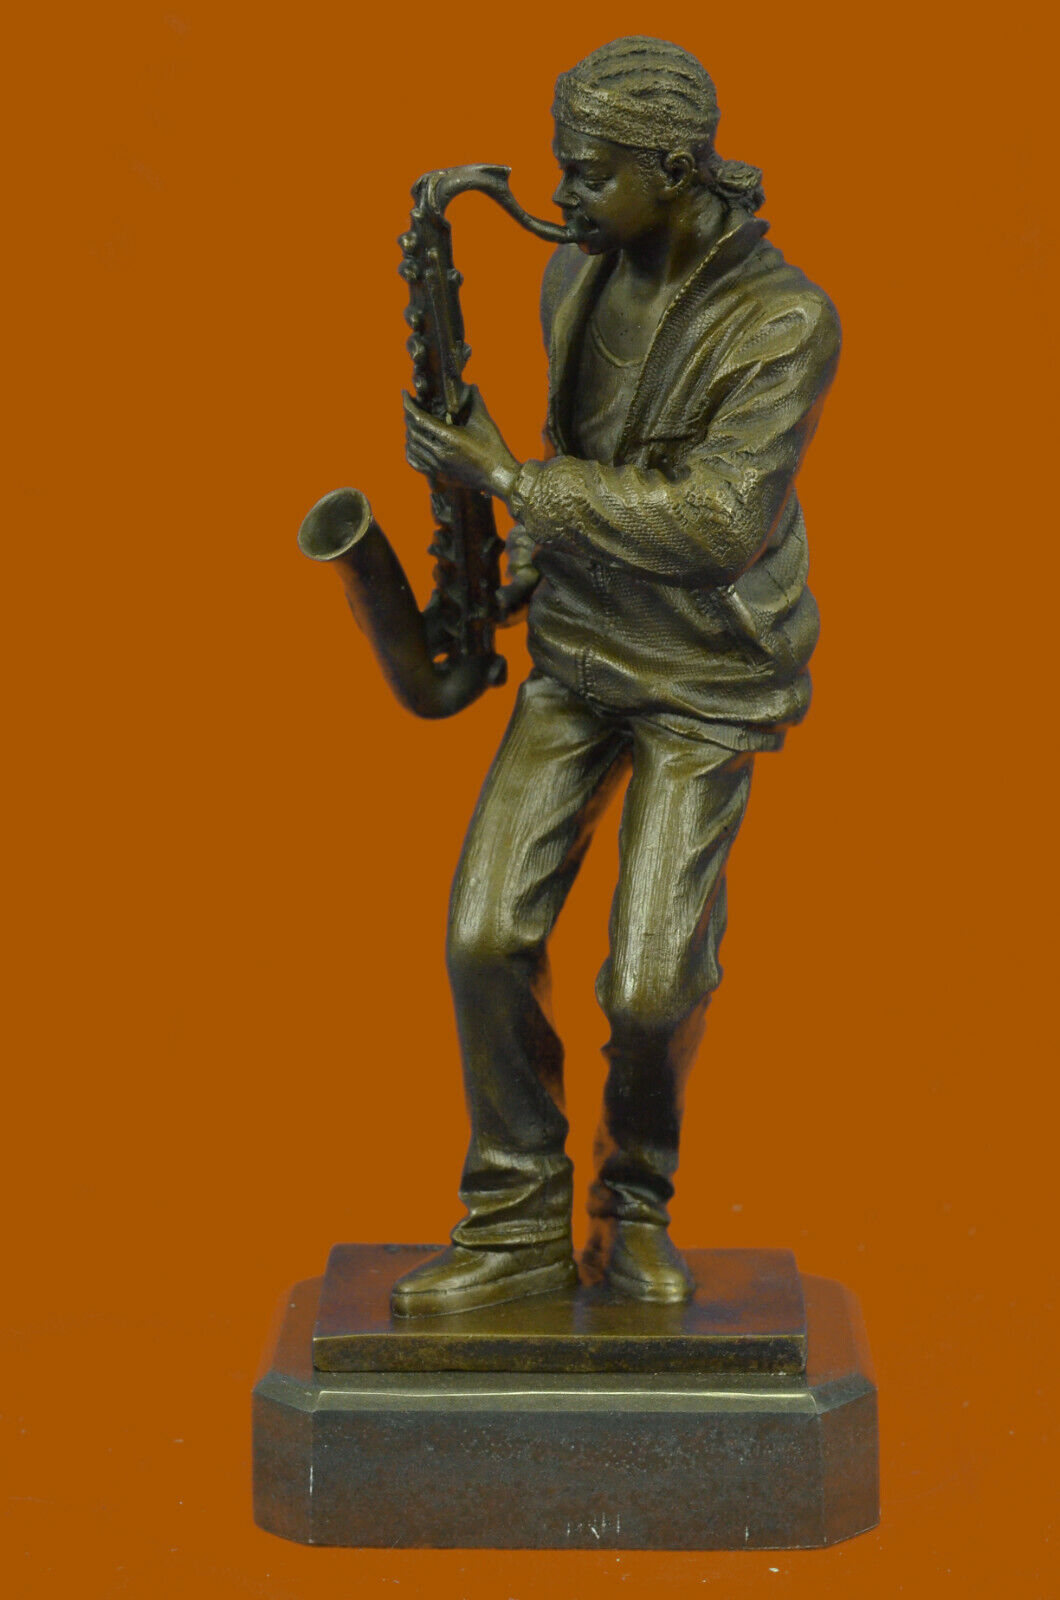 SAXOPHONE PLAYER Bronze Statuette JAZZ BAND Collection, 11